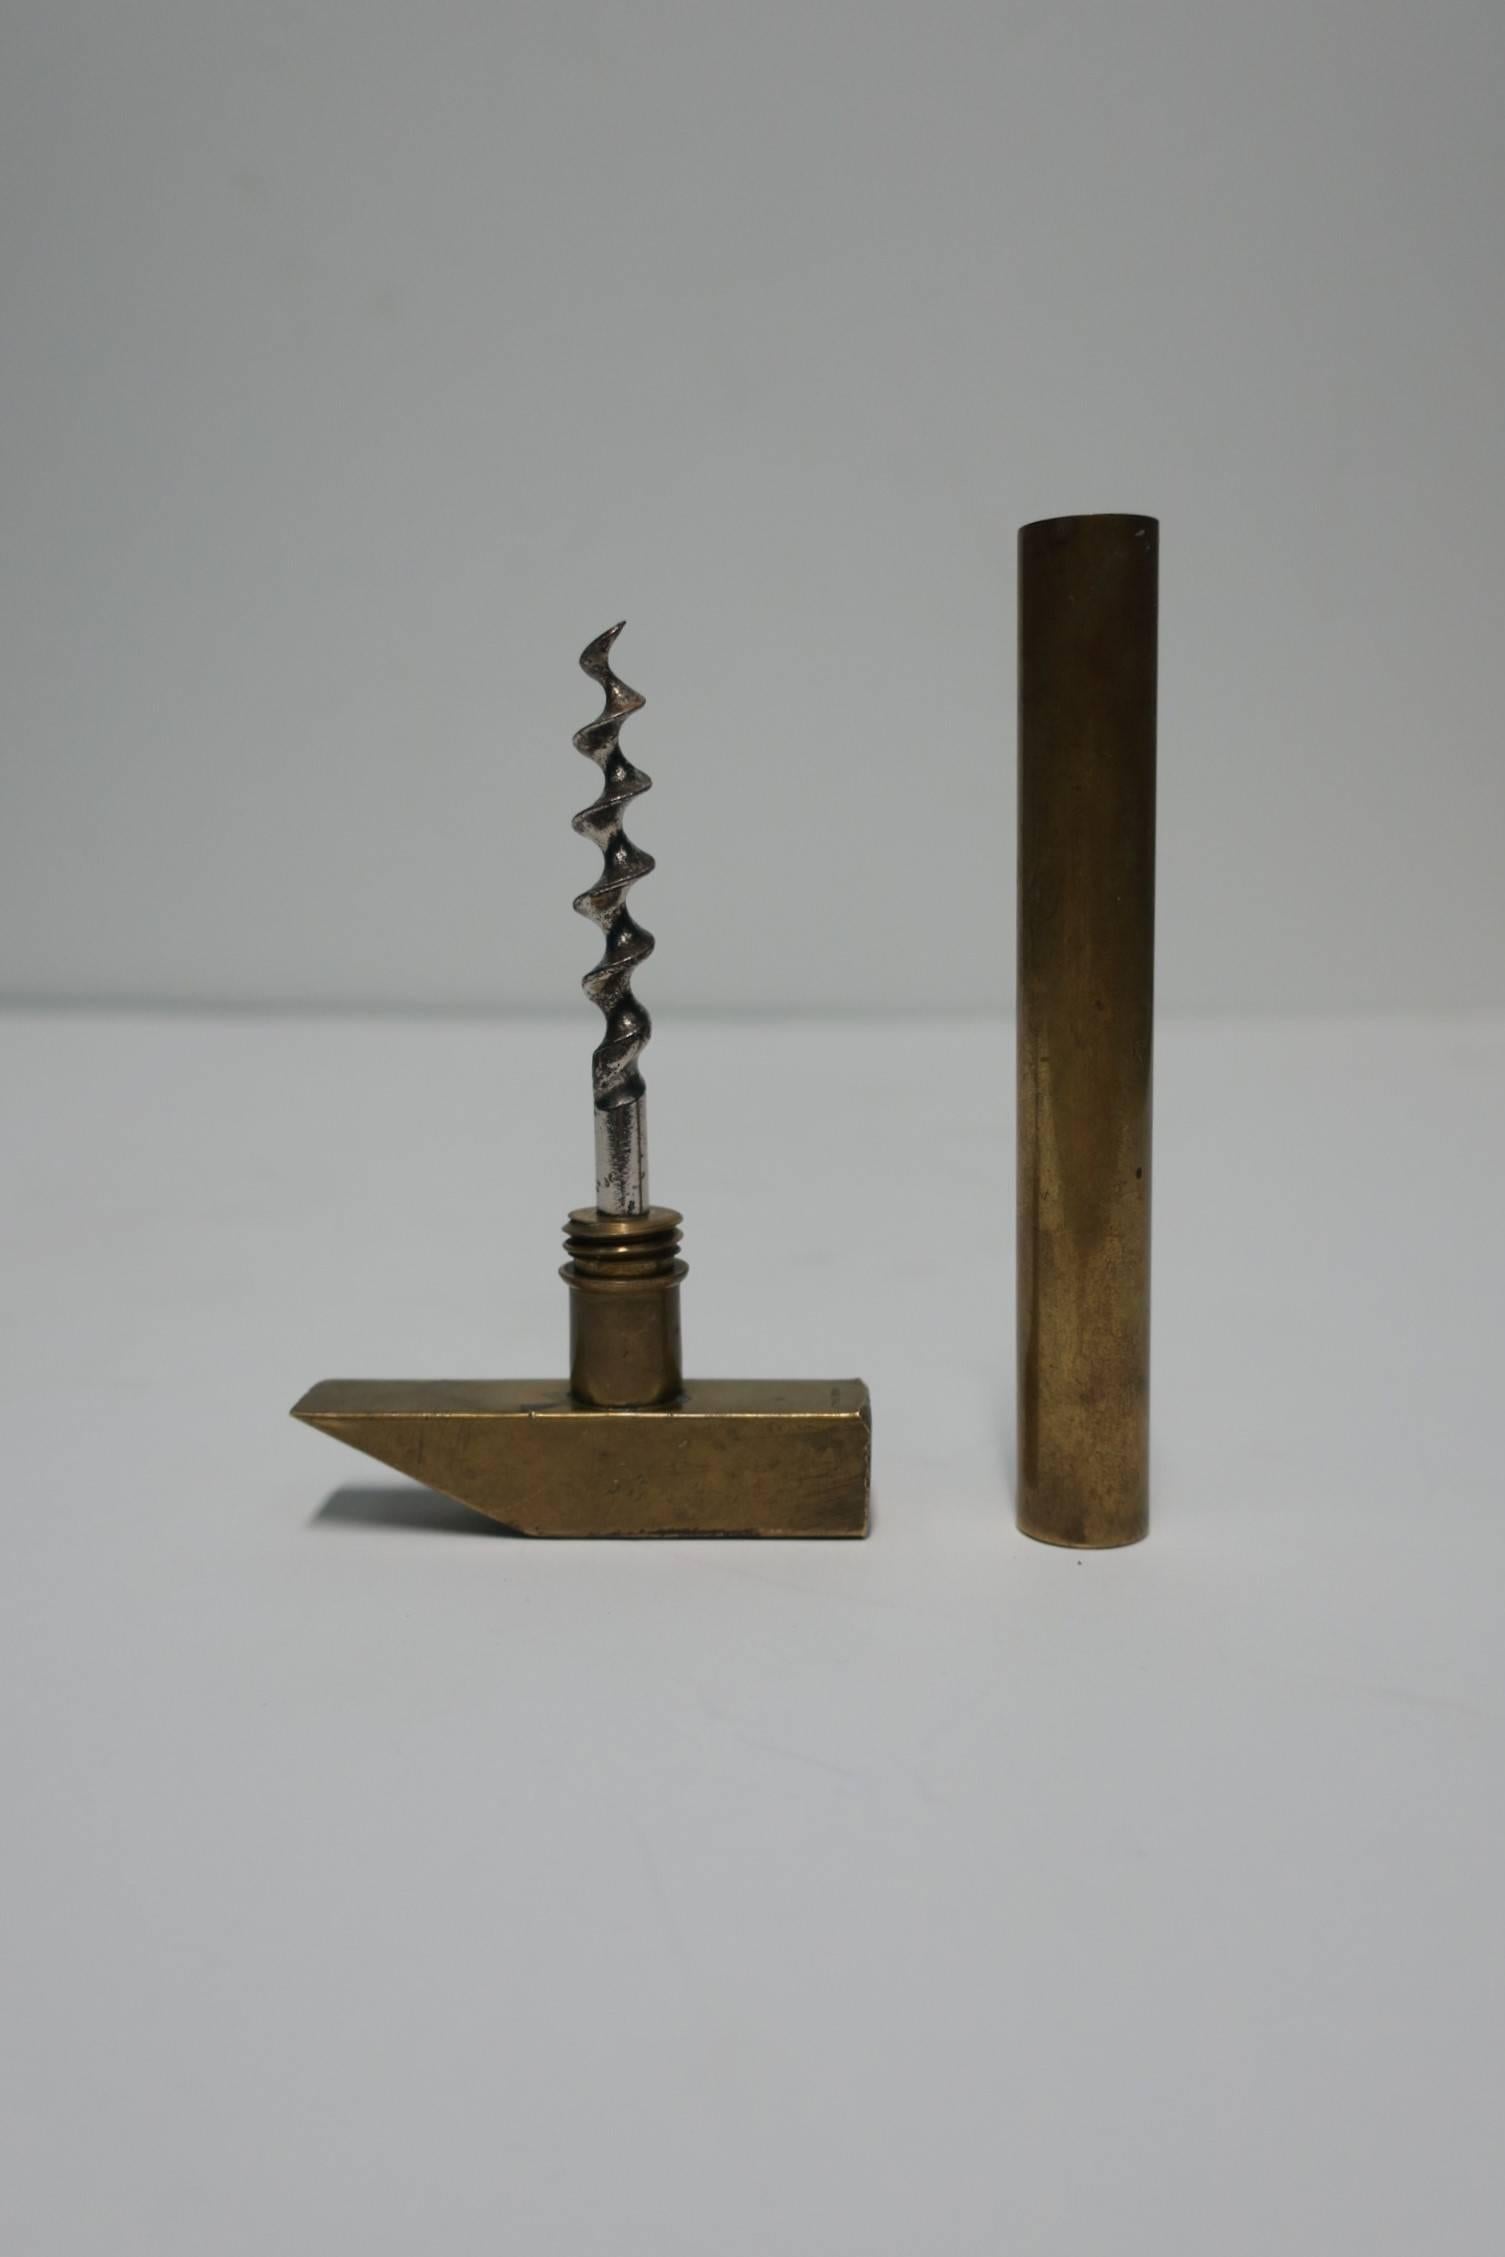 A vintage Italian brass hammer tool corkscrew wine bottle opener. Beautifully designed solid brass tool with twist-off handle that reveals 'screw'. Marked 'Made in Italy' show in image #6. Great for a bar or bar cart.

Measures: 5.5 in. x 2.5 in.
